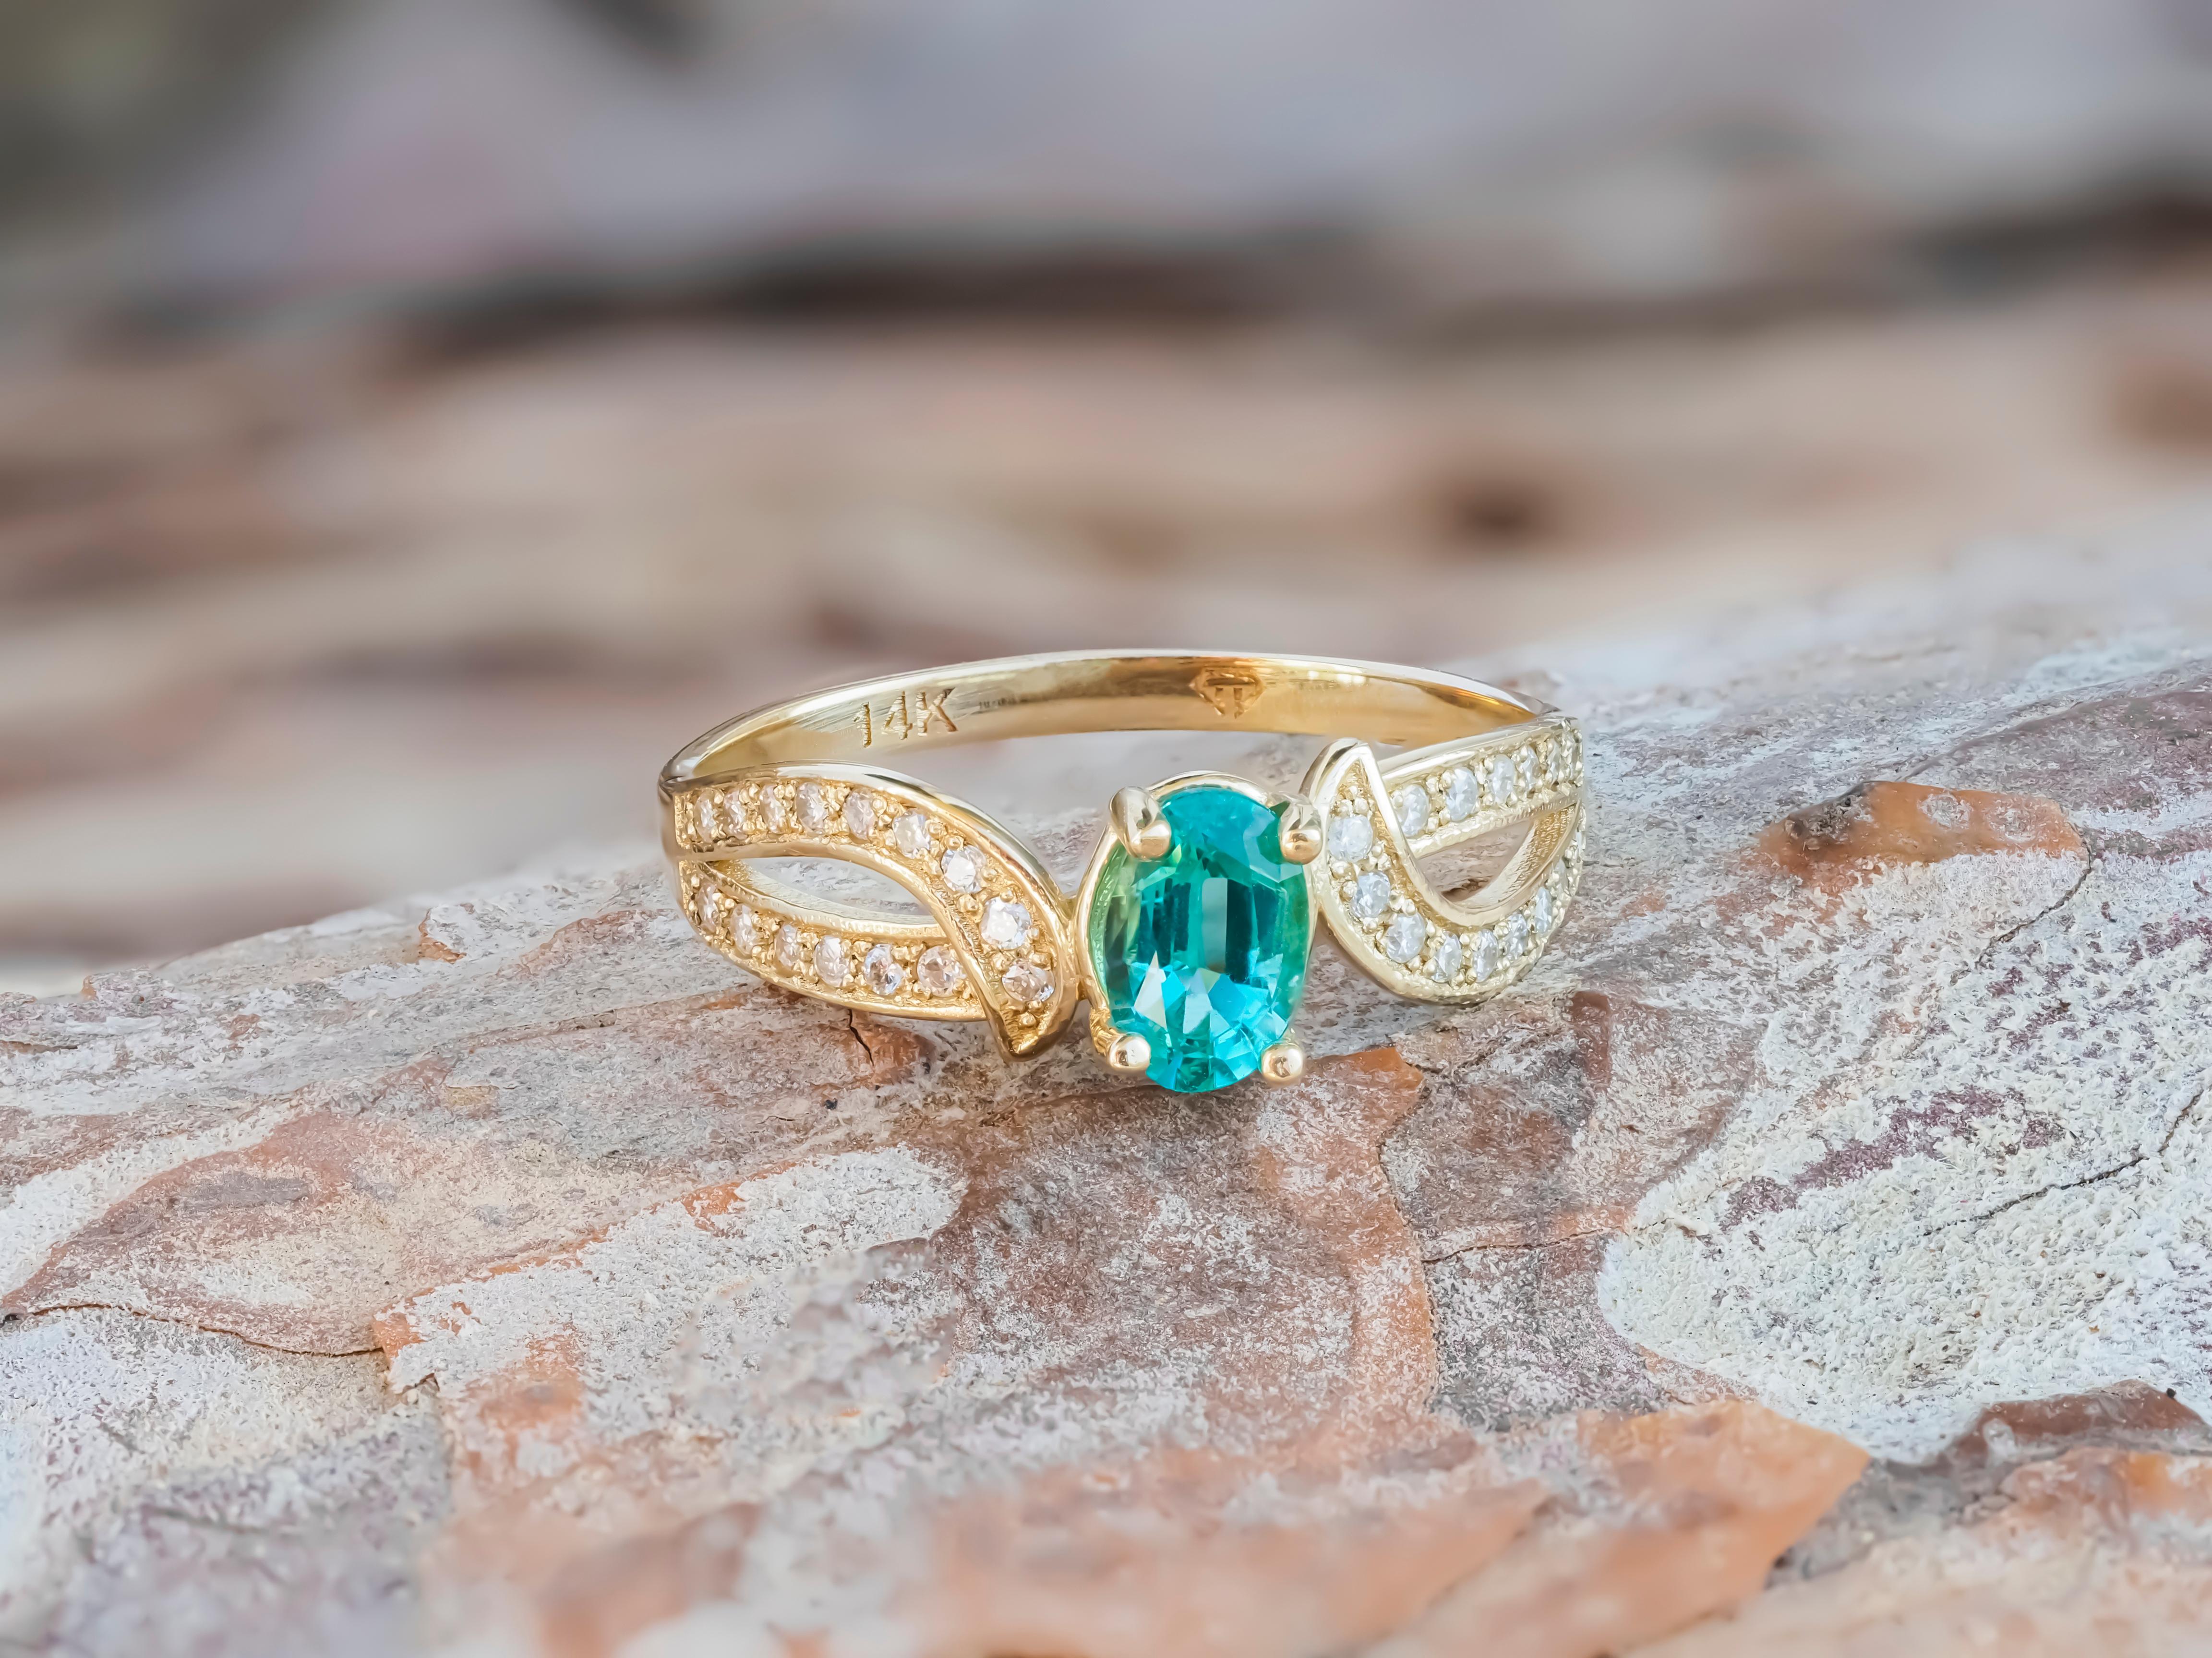 For Sale:  Emerald Vintage Ring, 14k Gold Ring with Emerald! 7